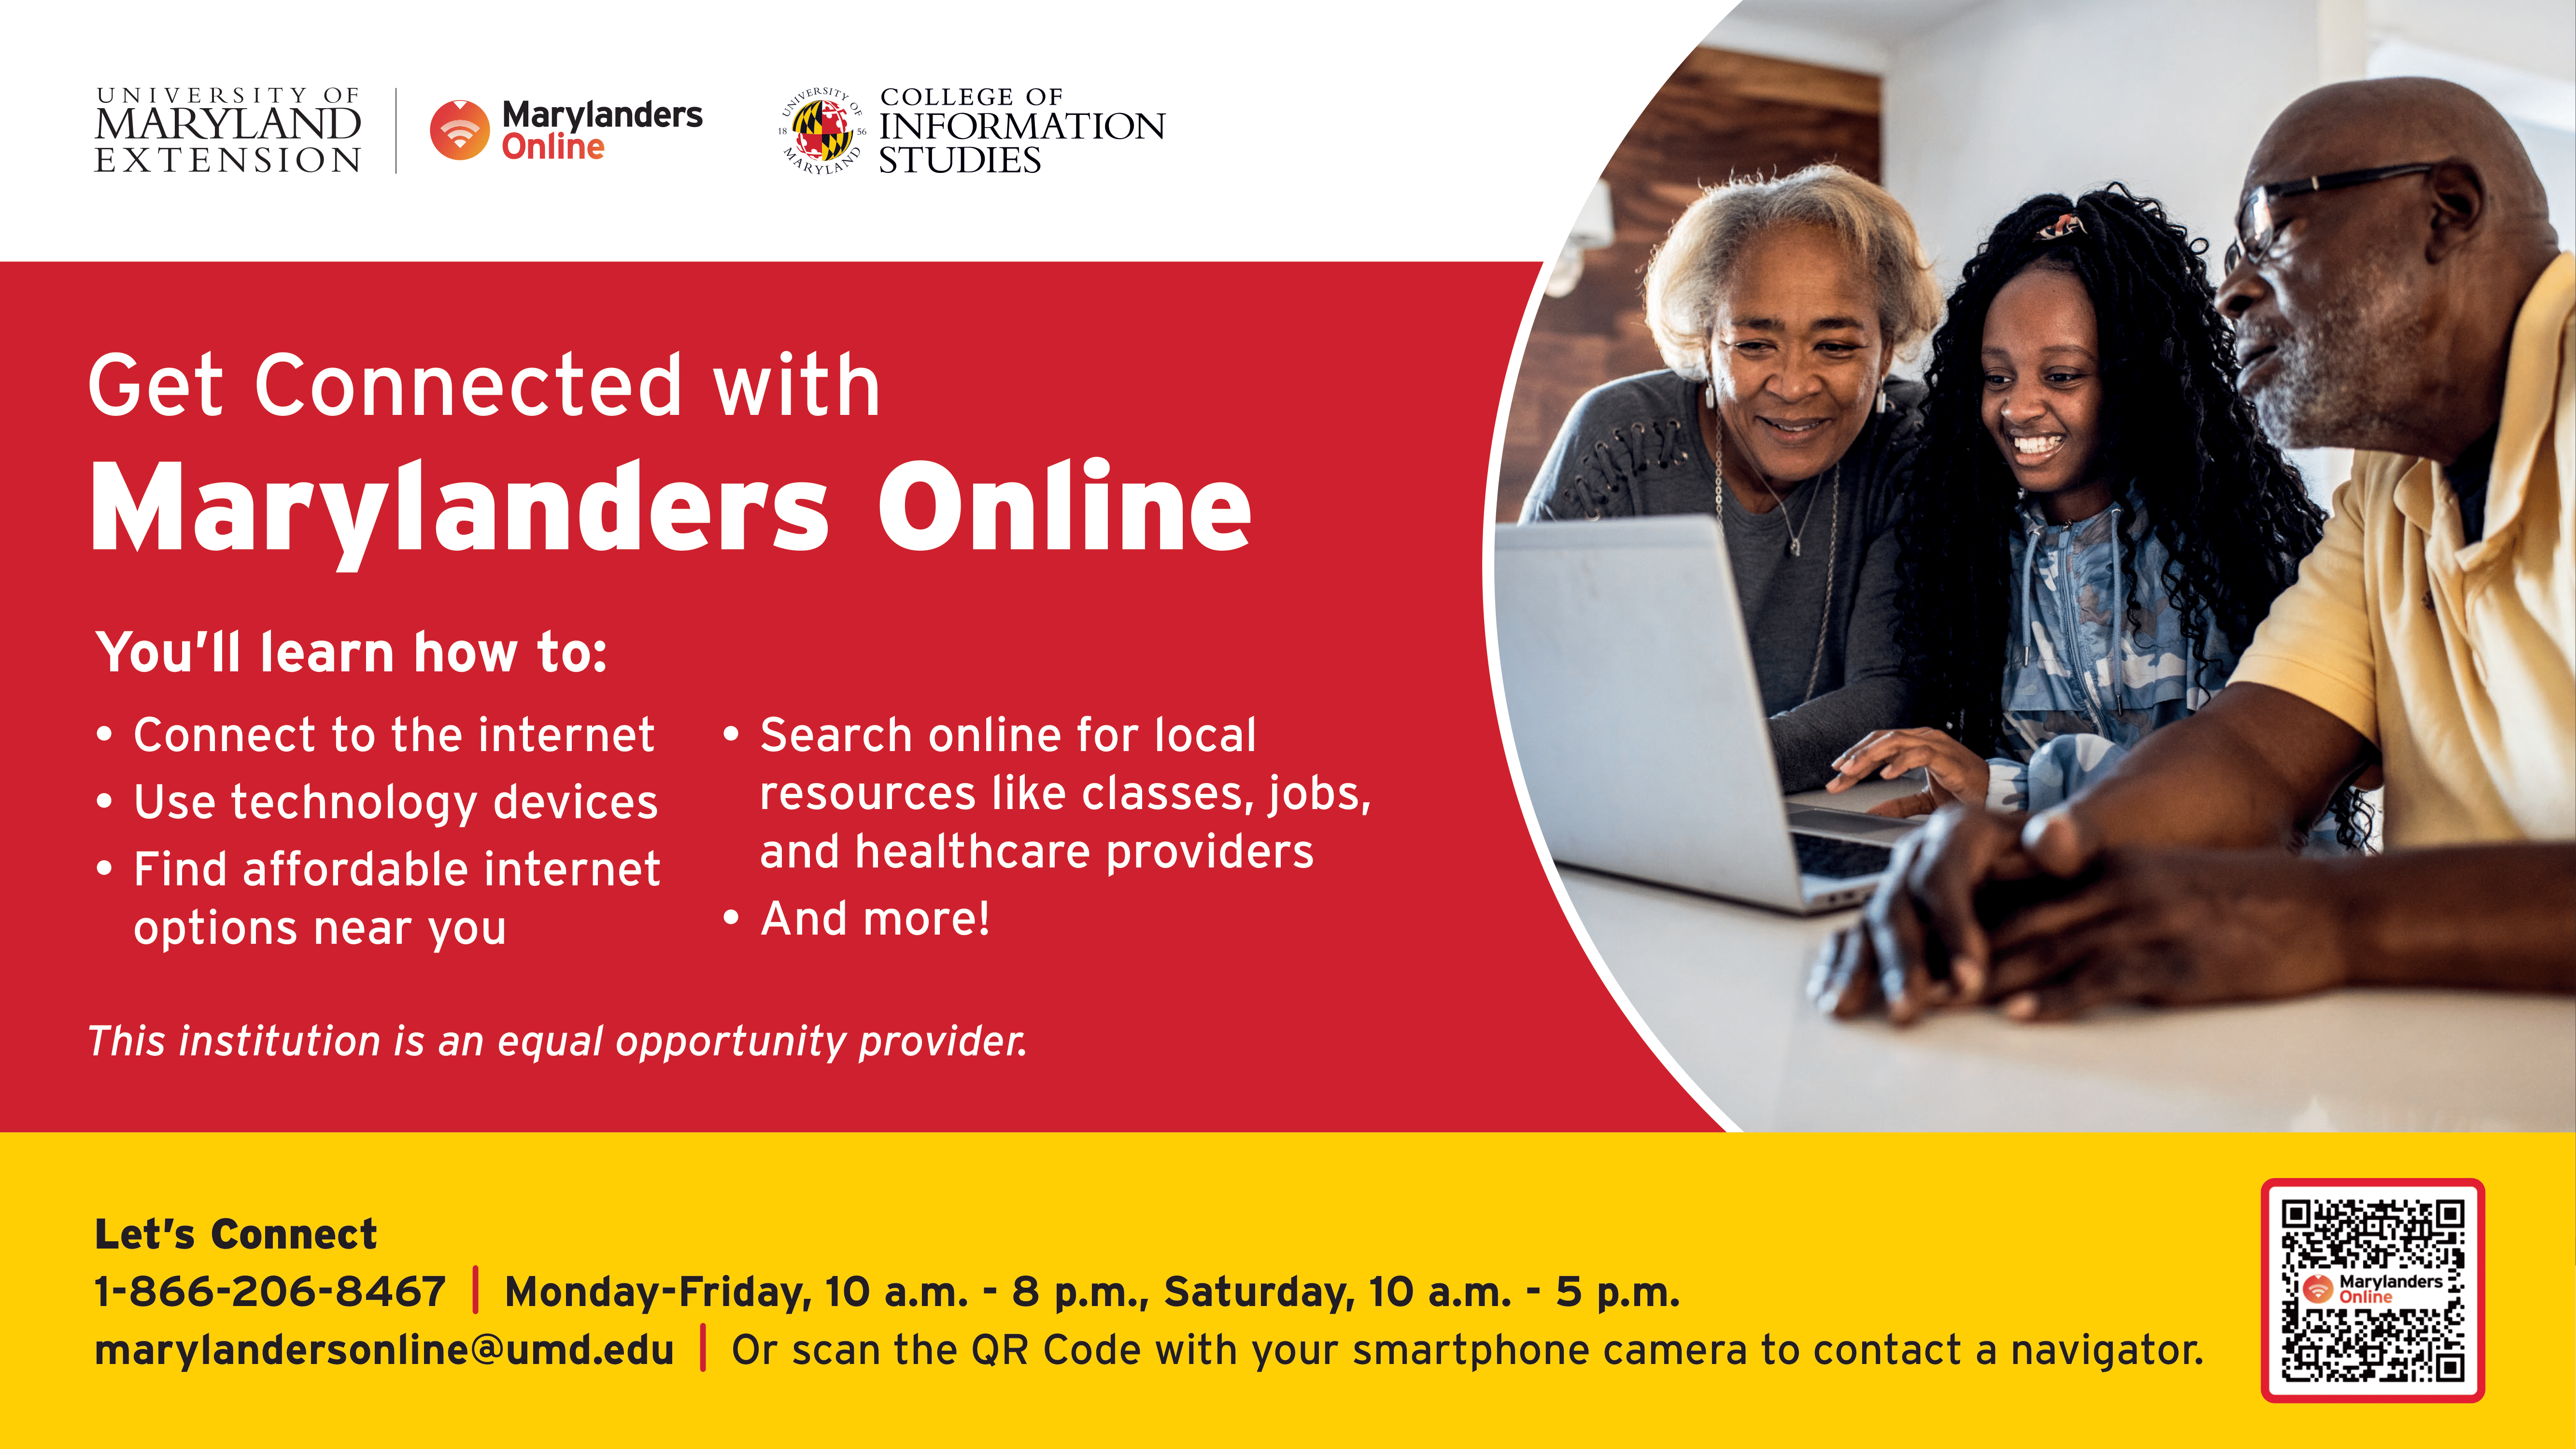 Get Connected with Marylanders Online